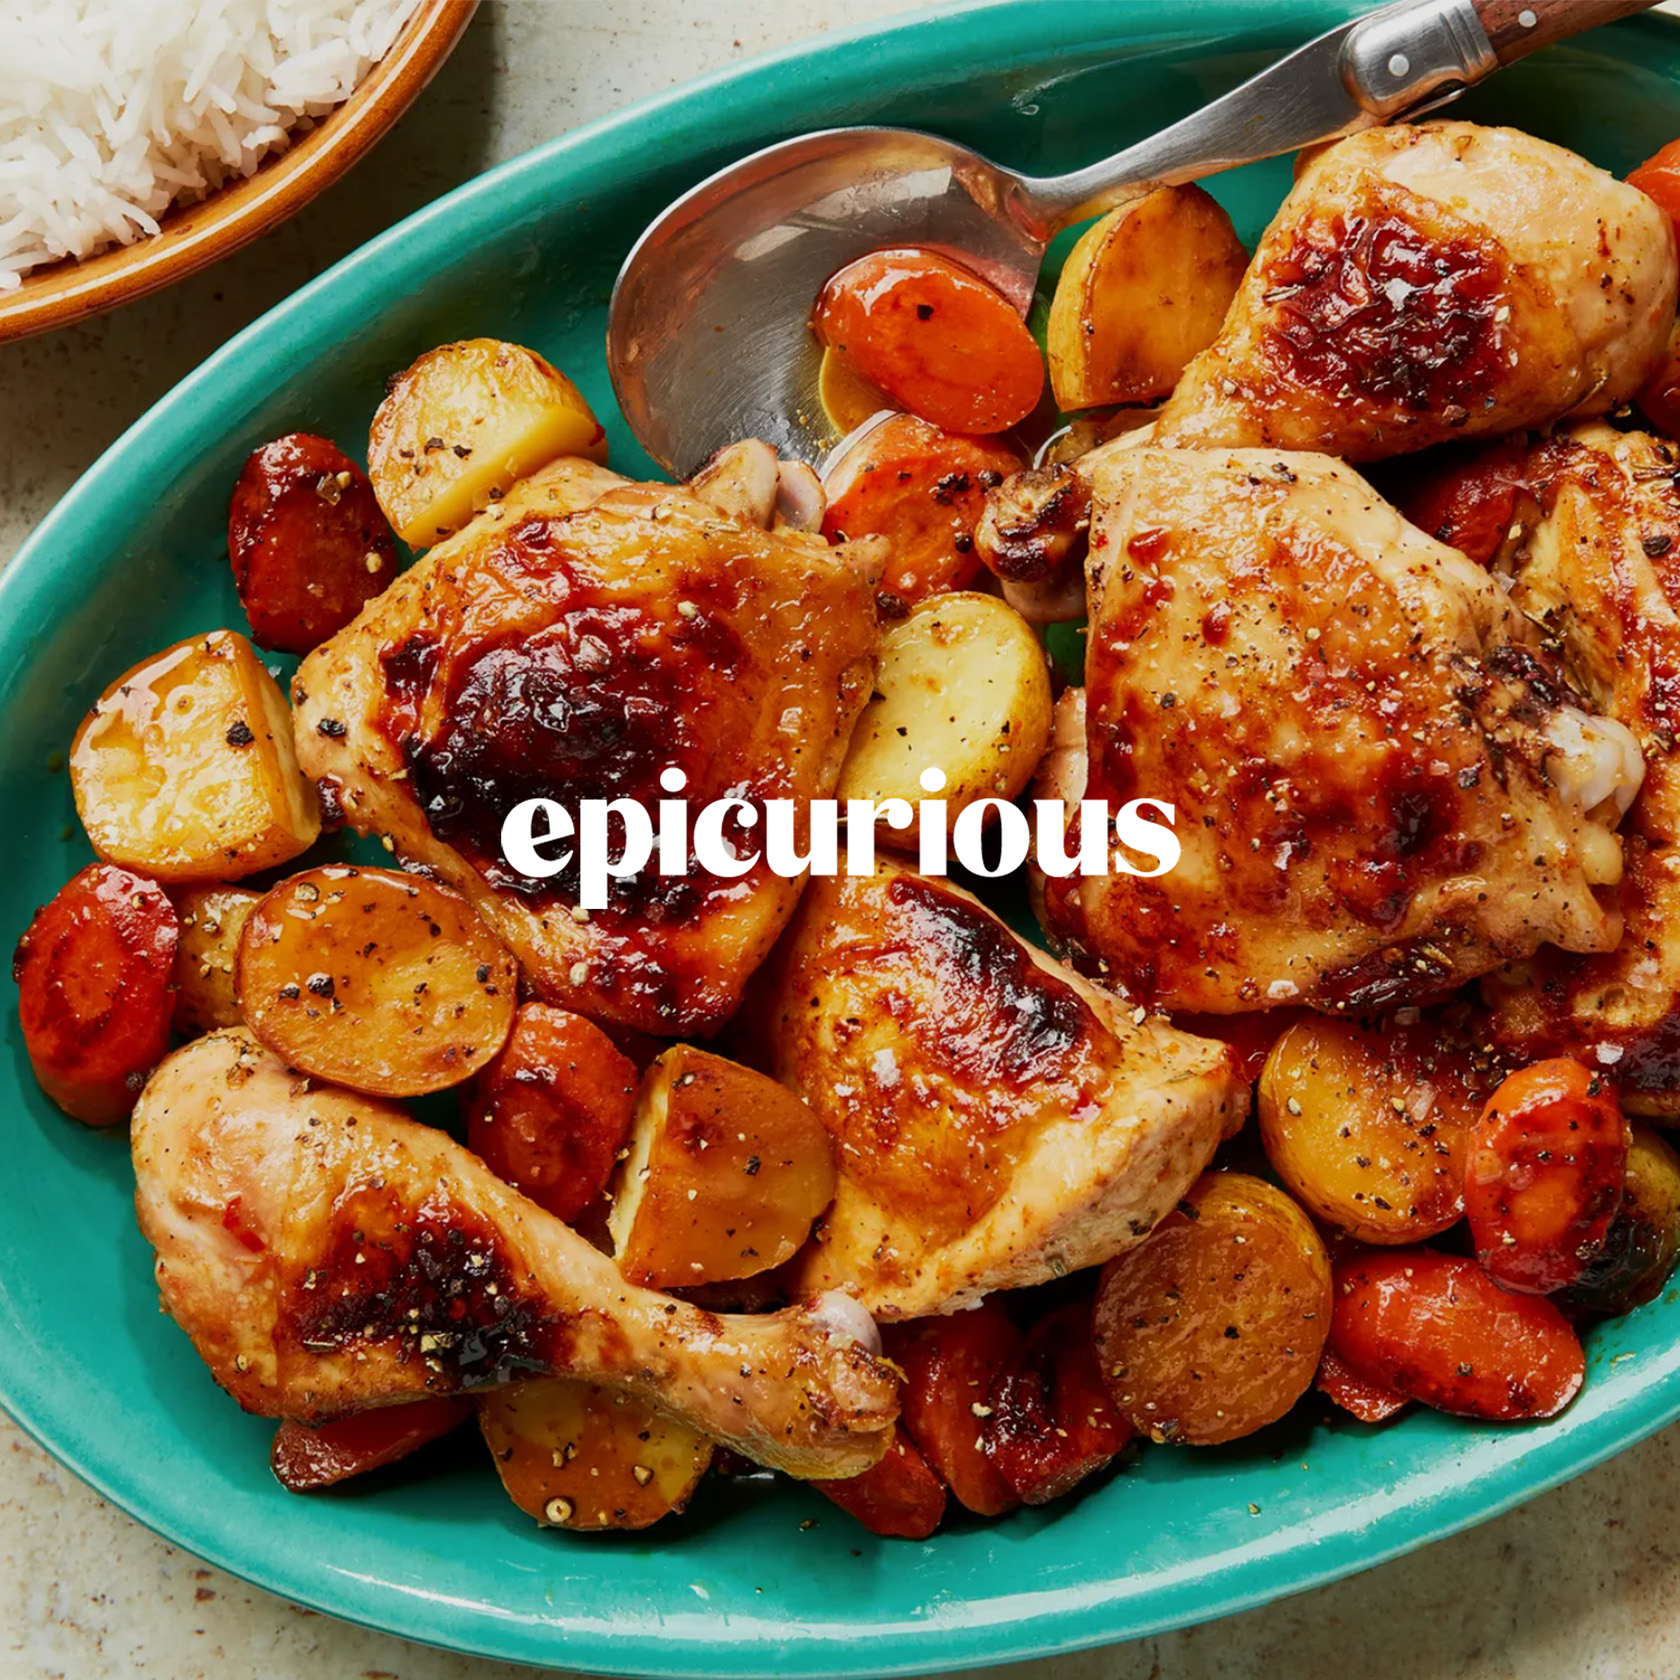 Epicurious: This New Pati Jinich Meal Plan Makes the Most of Leftovers